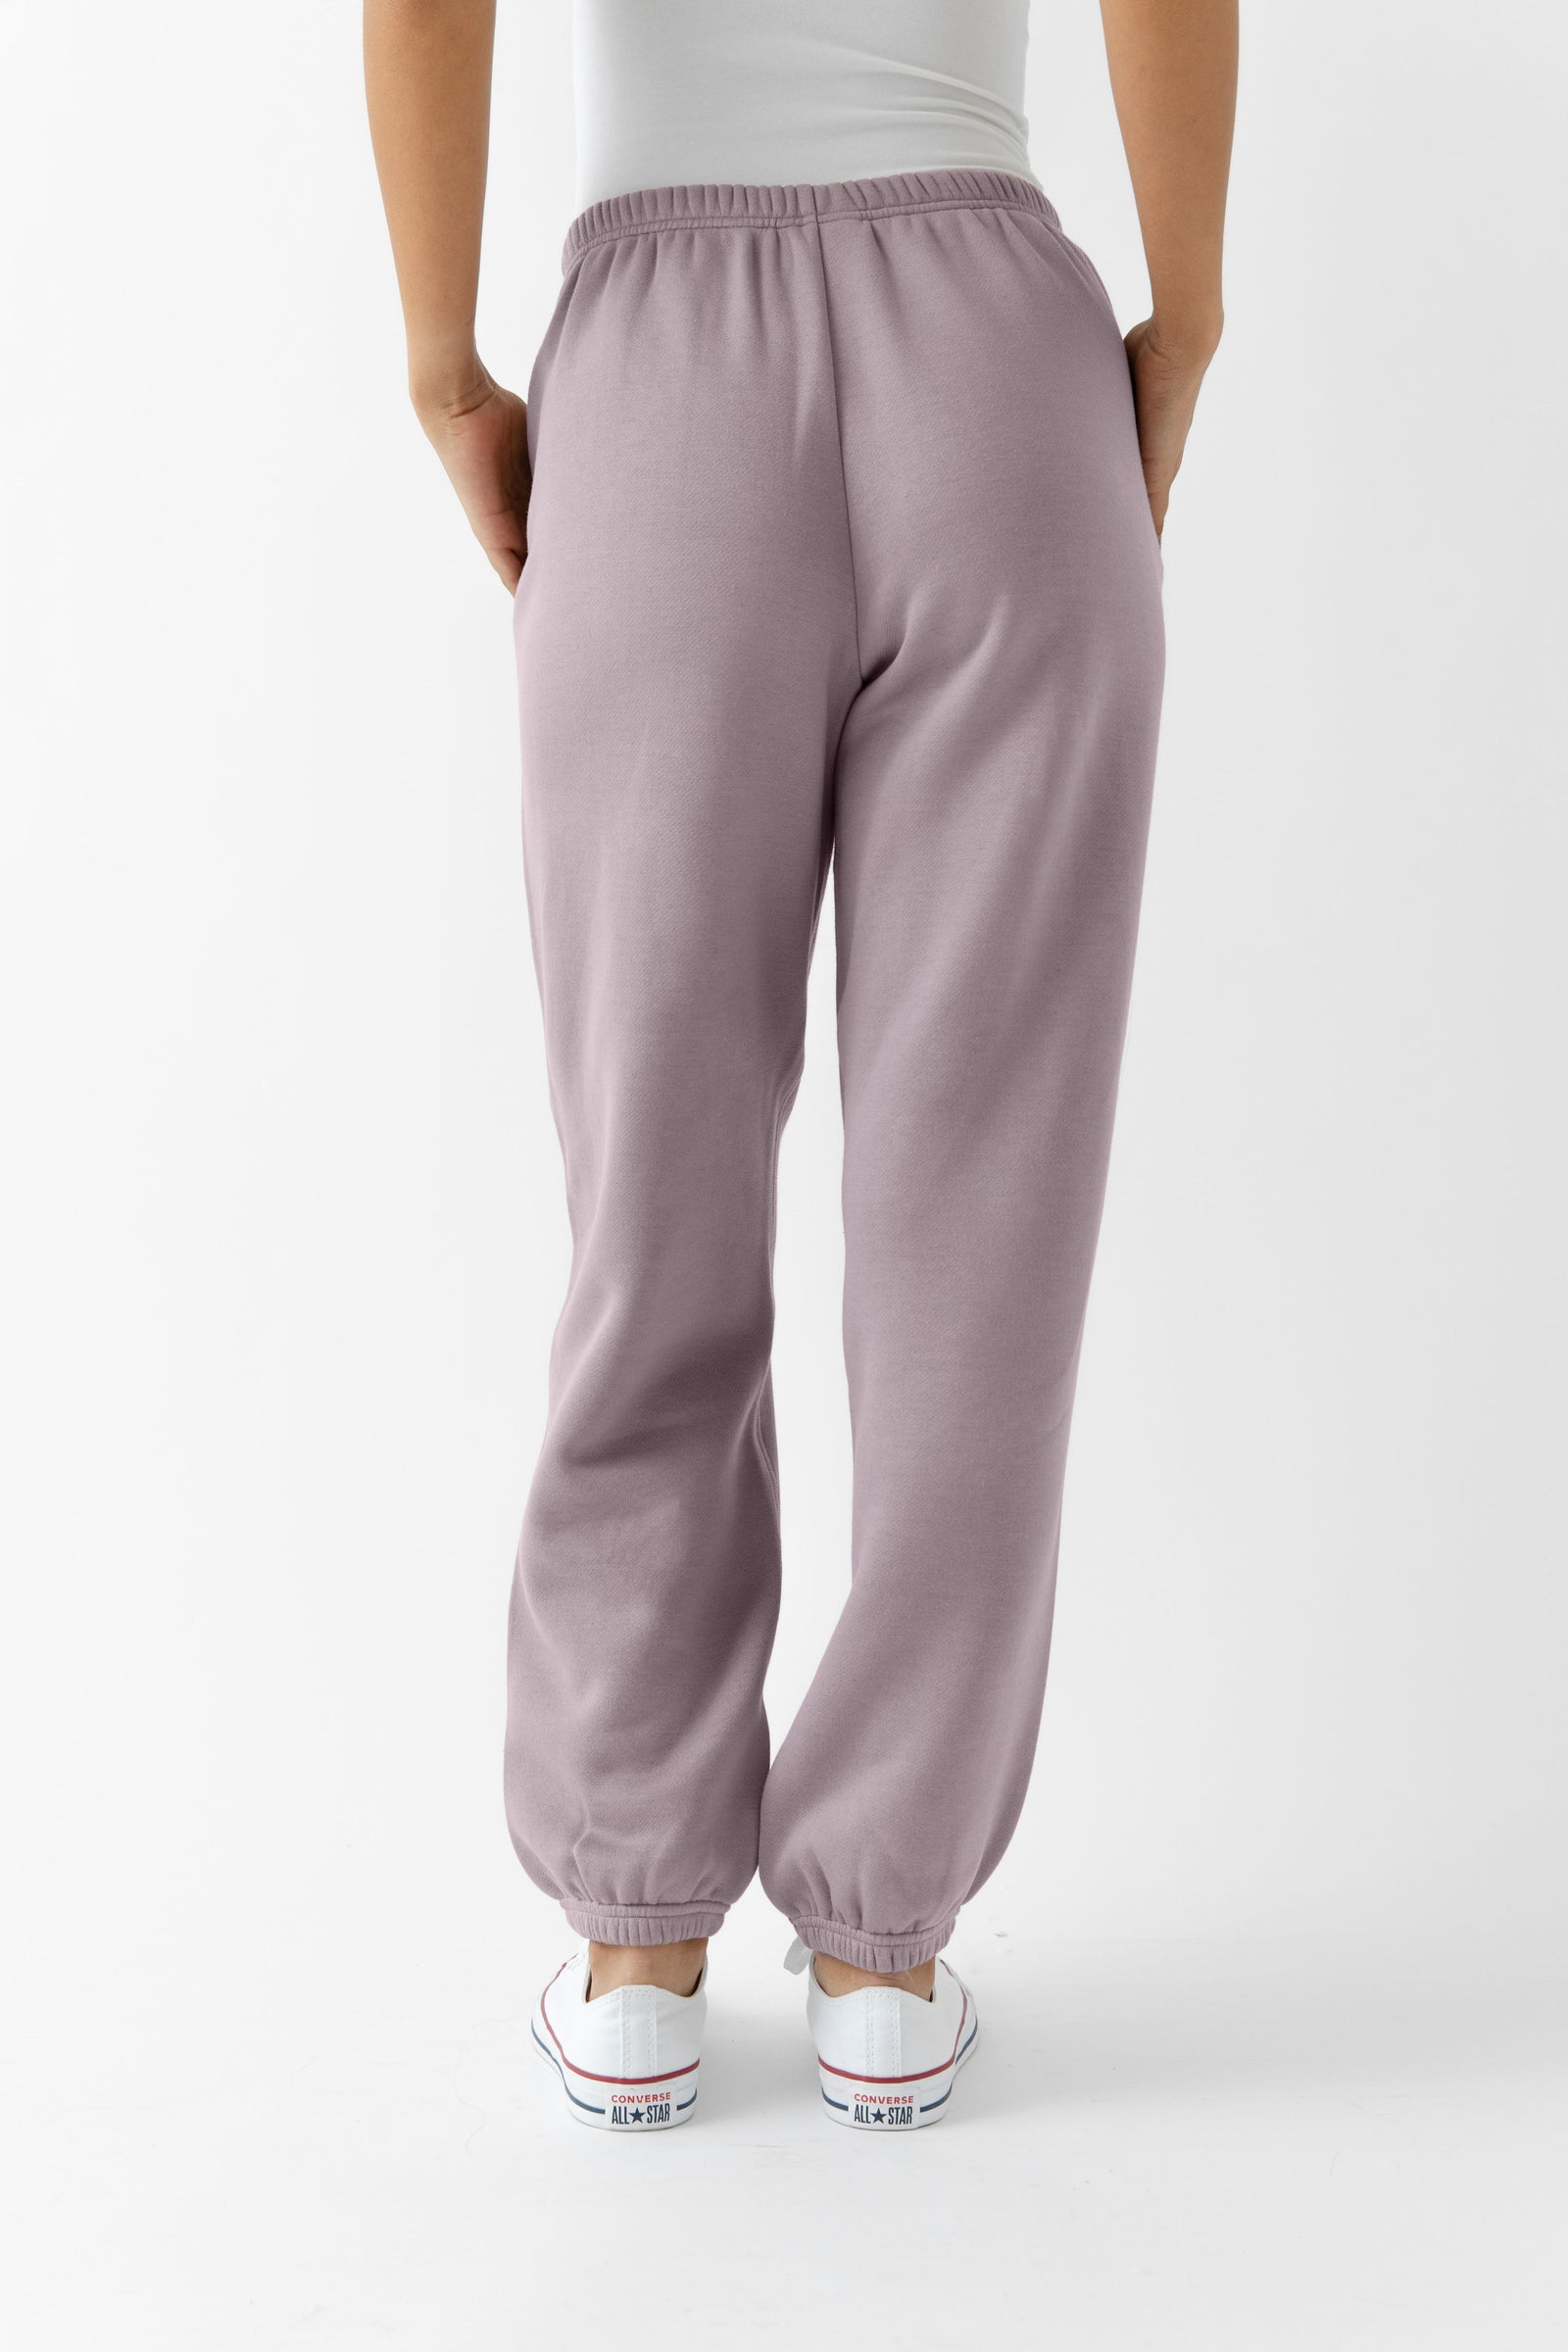 Dusty Orchid CityScape Joggers. The Joggers are being worn by a female model. The photo is taken from the waist down with the models hands in the pockets of the joggers. The back ground is white. 